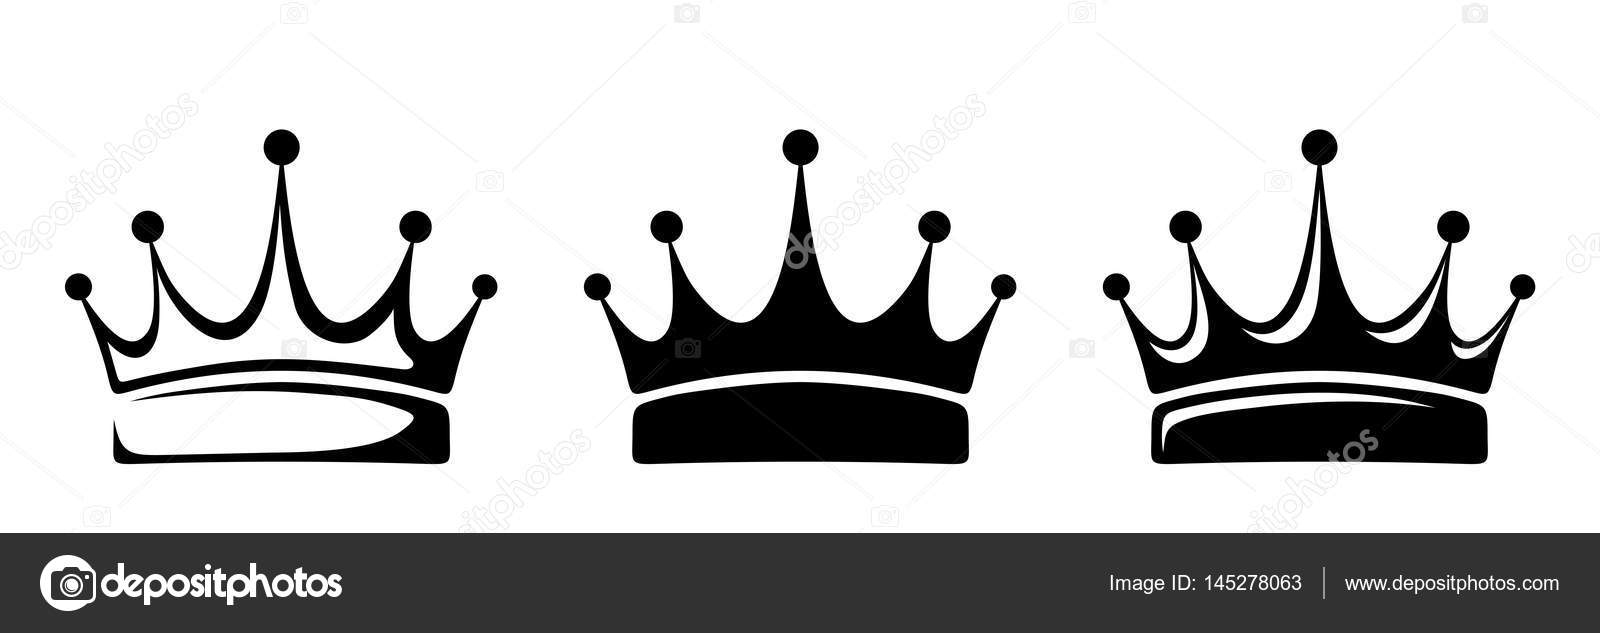 Download Crowns. Vector black silhouettes. — Stock Vector © Naddya ...